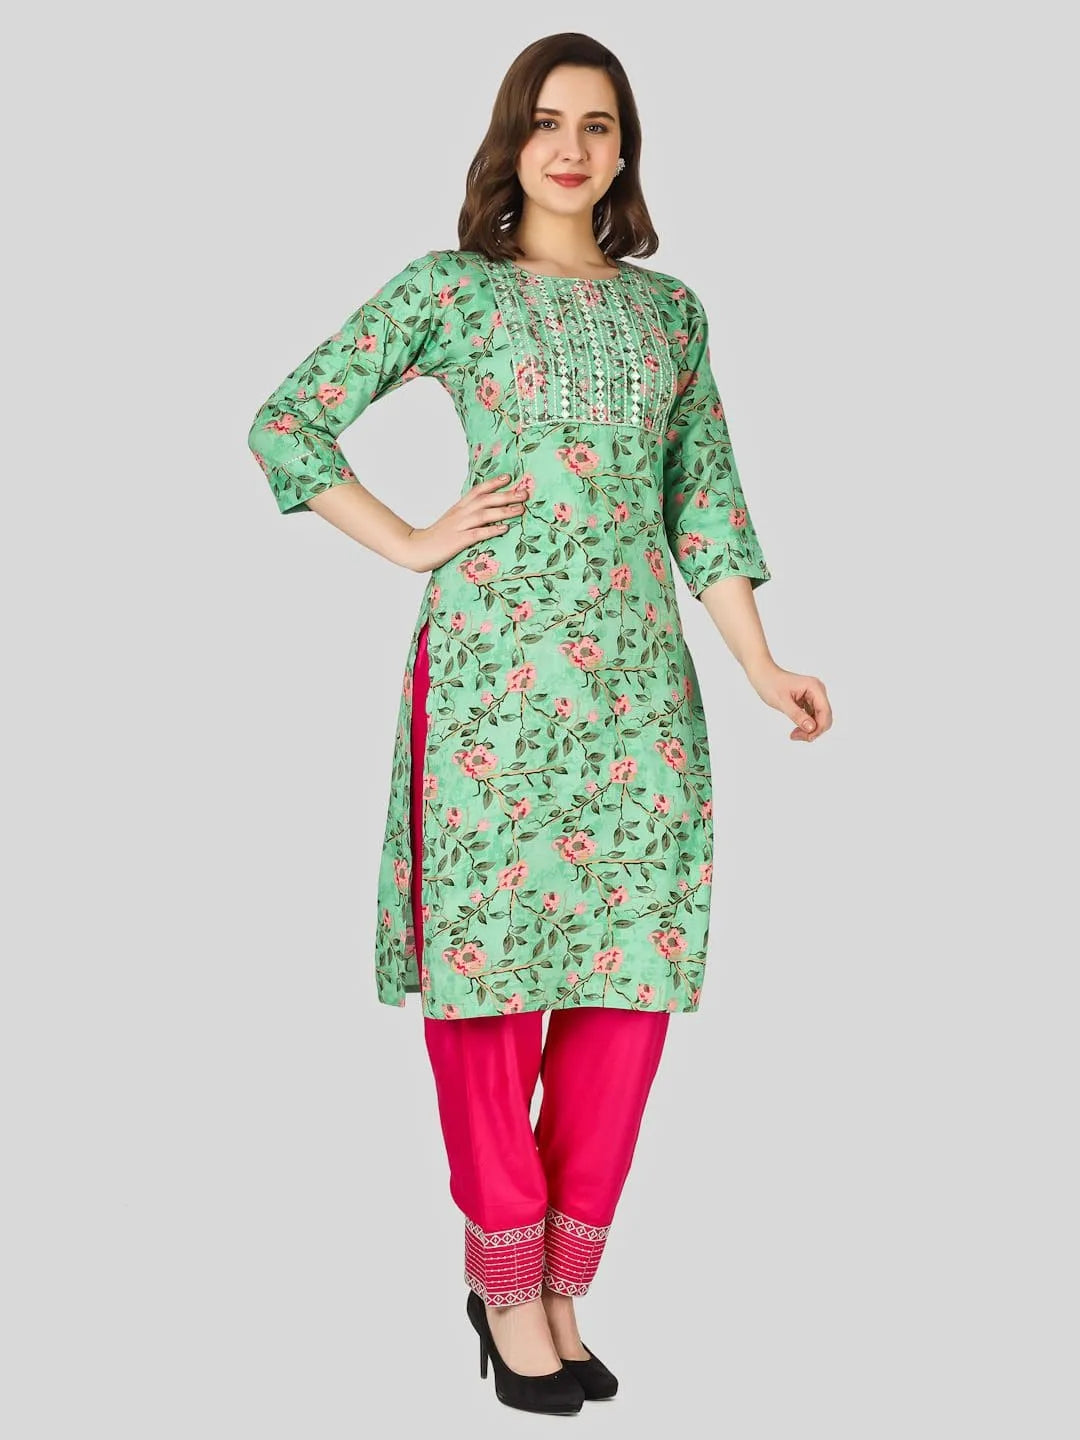 Glamorous Floral embroidered seafoam green Color Thread work Straight shape Round neck, three-quarter regular sleeves Kurta with Plazo for women.